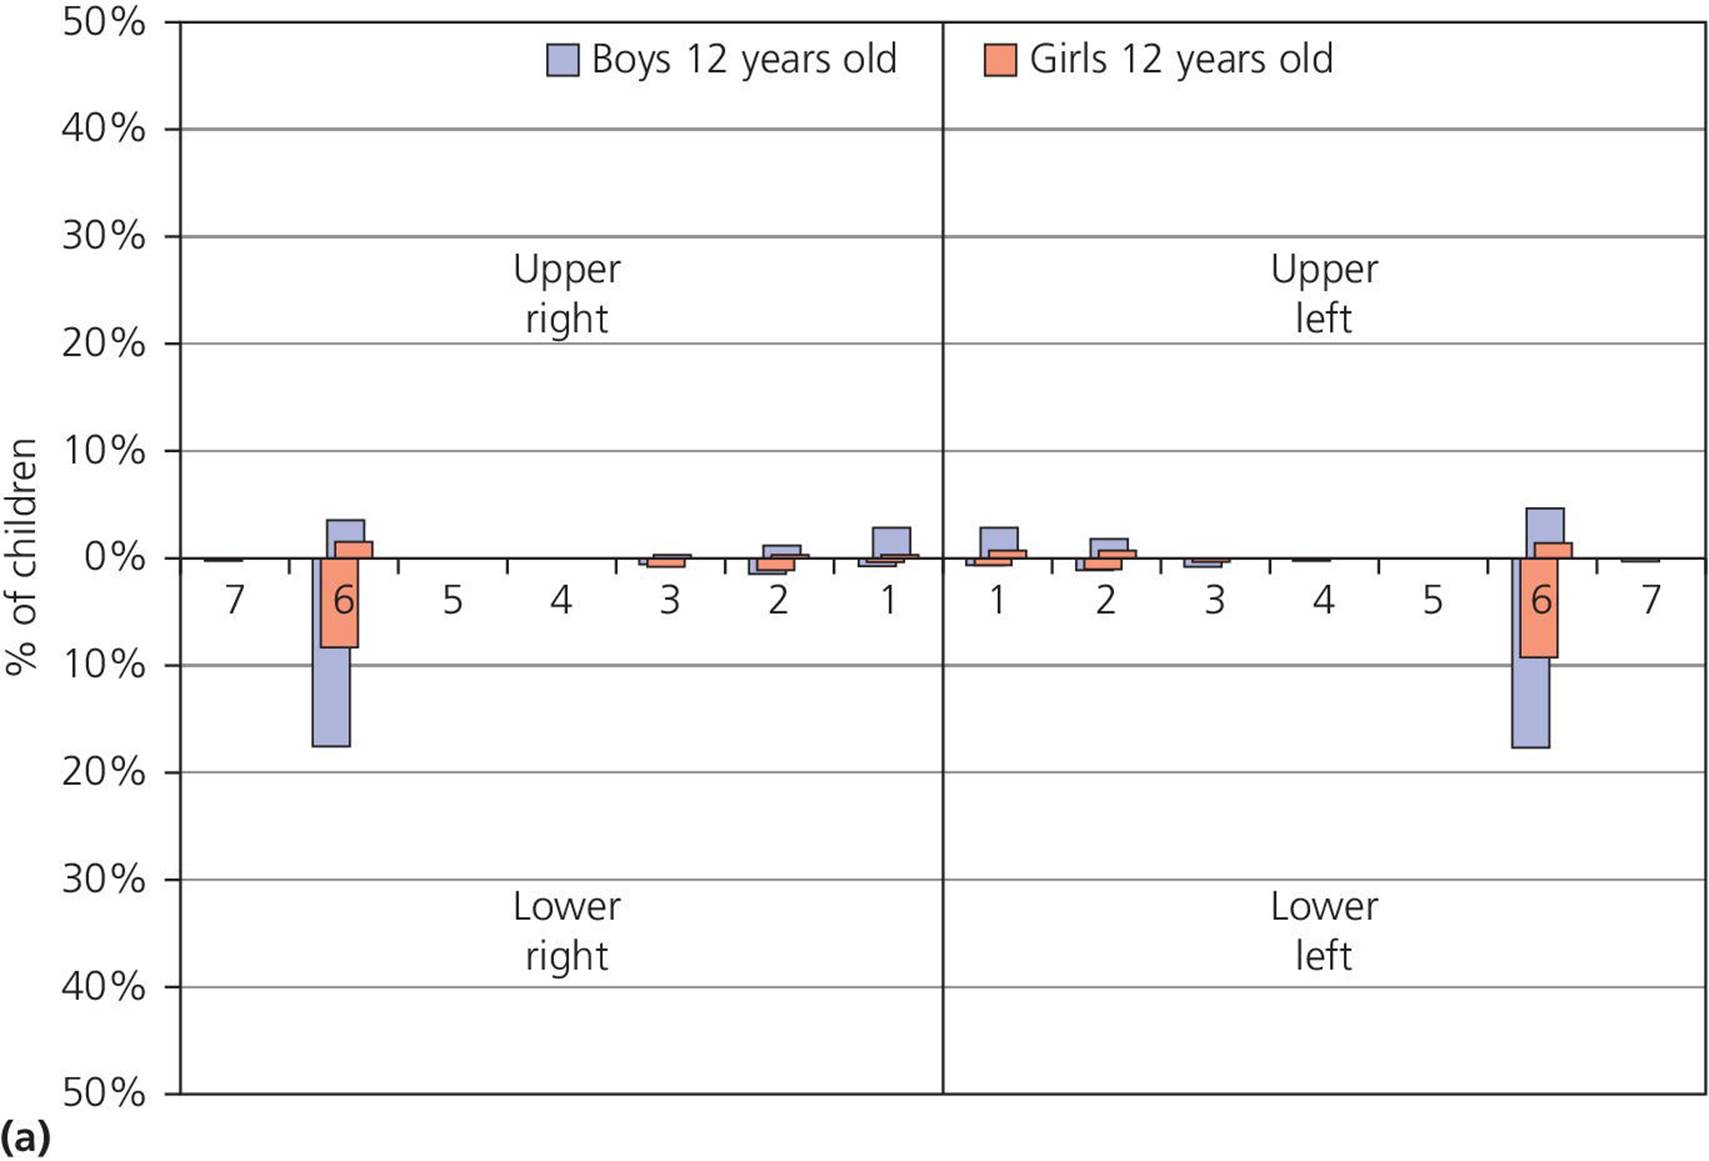 4 Quadrant bar graph displaying the percentage of boys and girls with dental erosion at 12 years of age. Bars for boys are higher than those for girls, particularly in the lower left and right teeth.